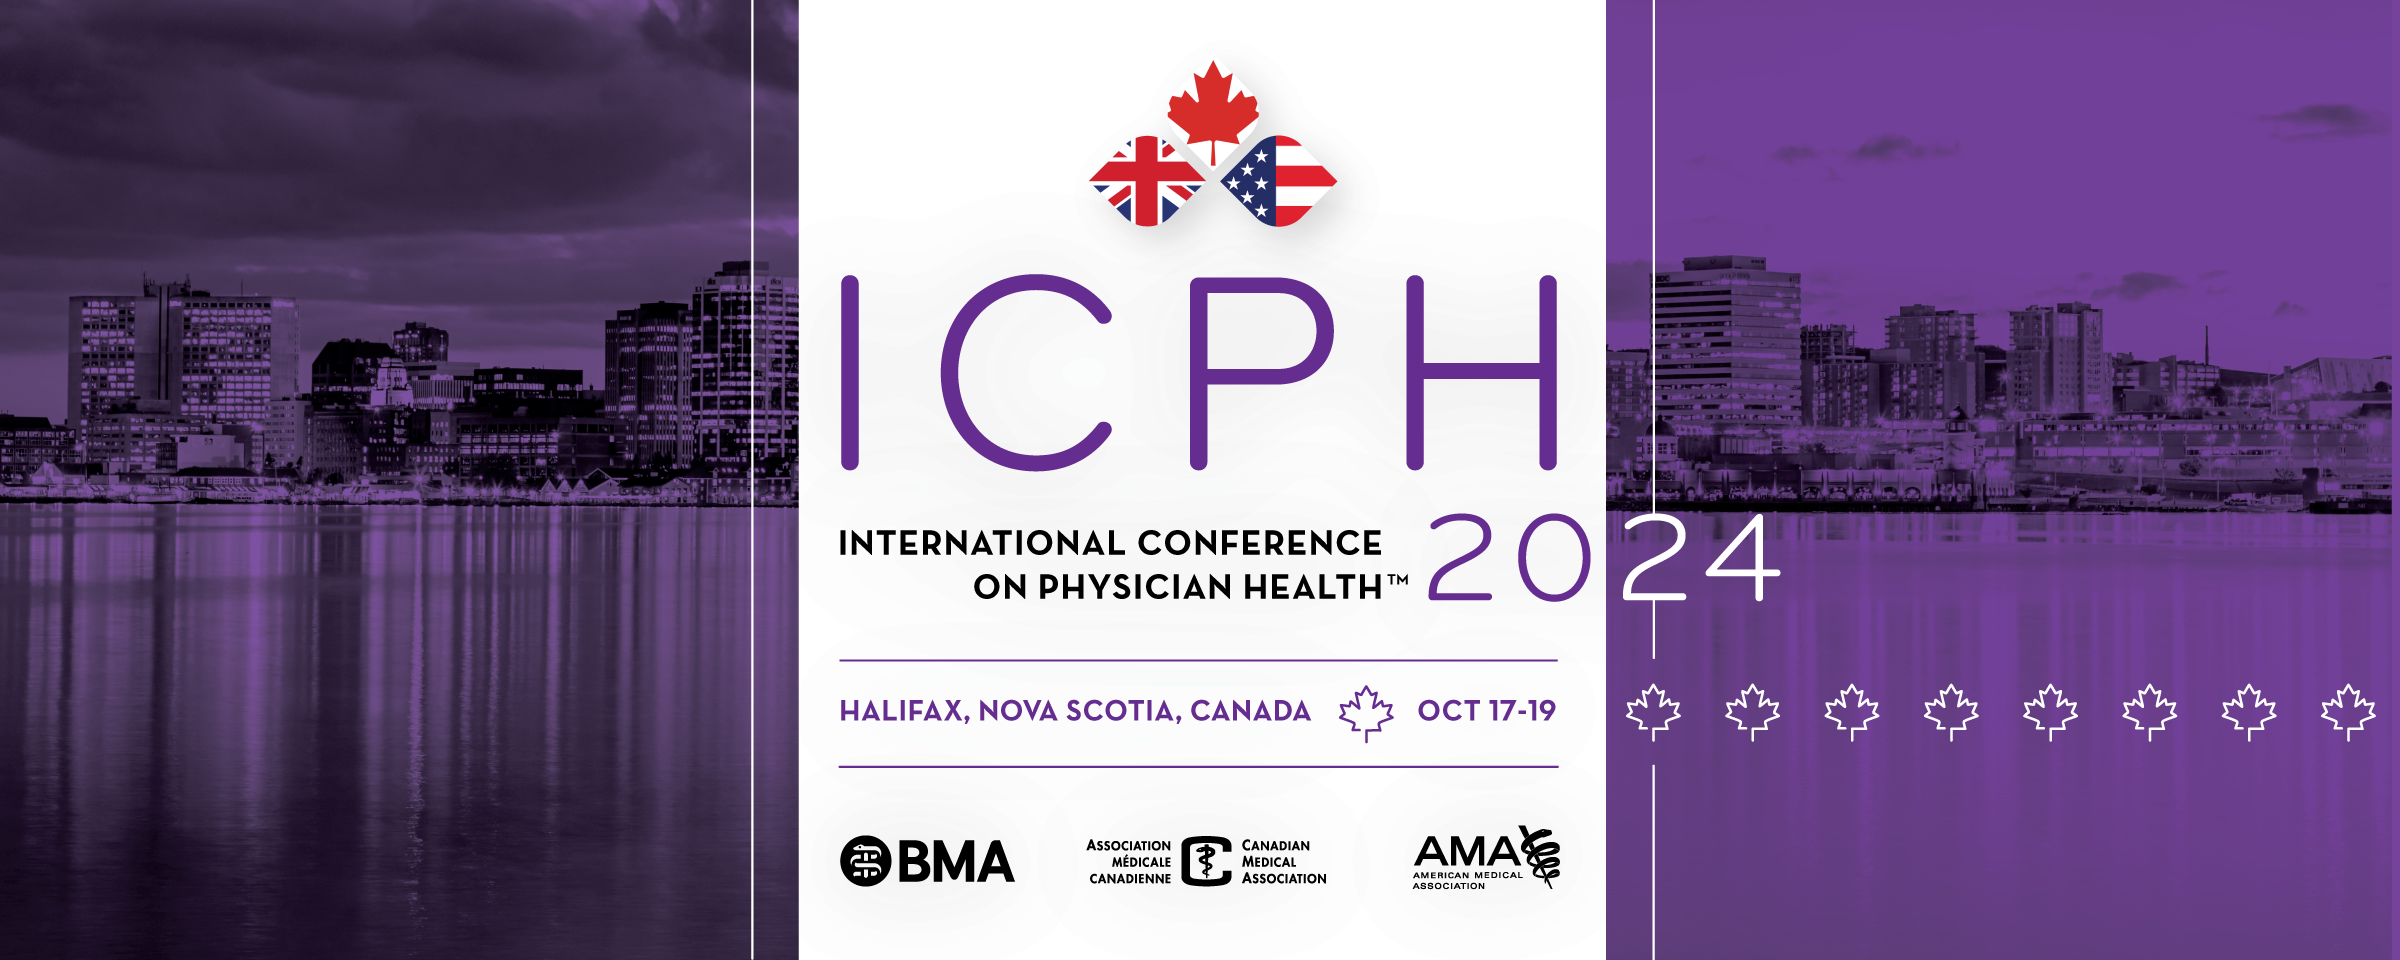 International Conference on Physician Health™ 2024